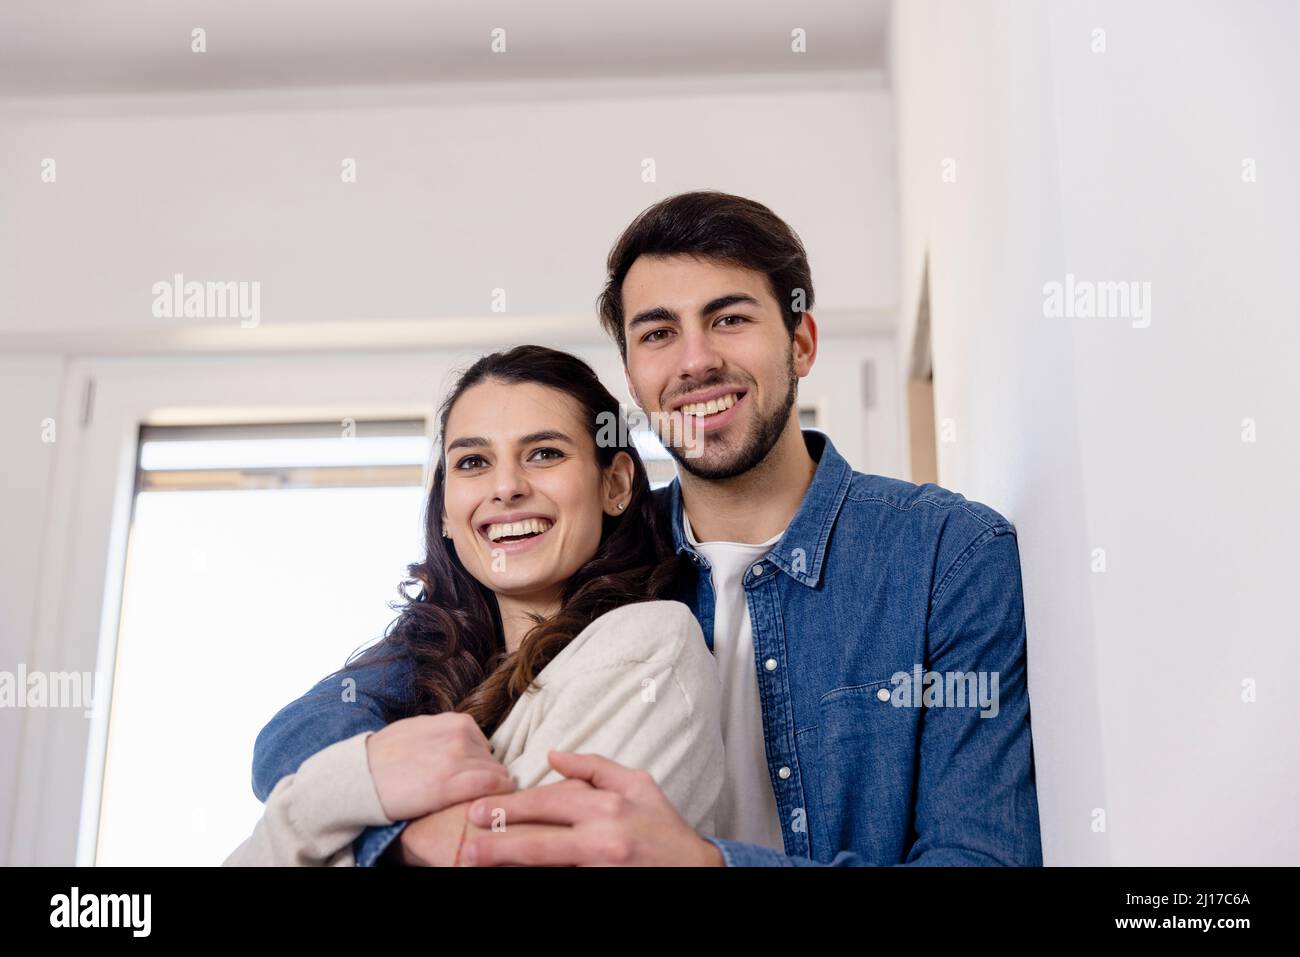 Smiling couple embracing at home renovation work Stock Photo